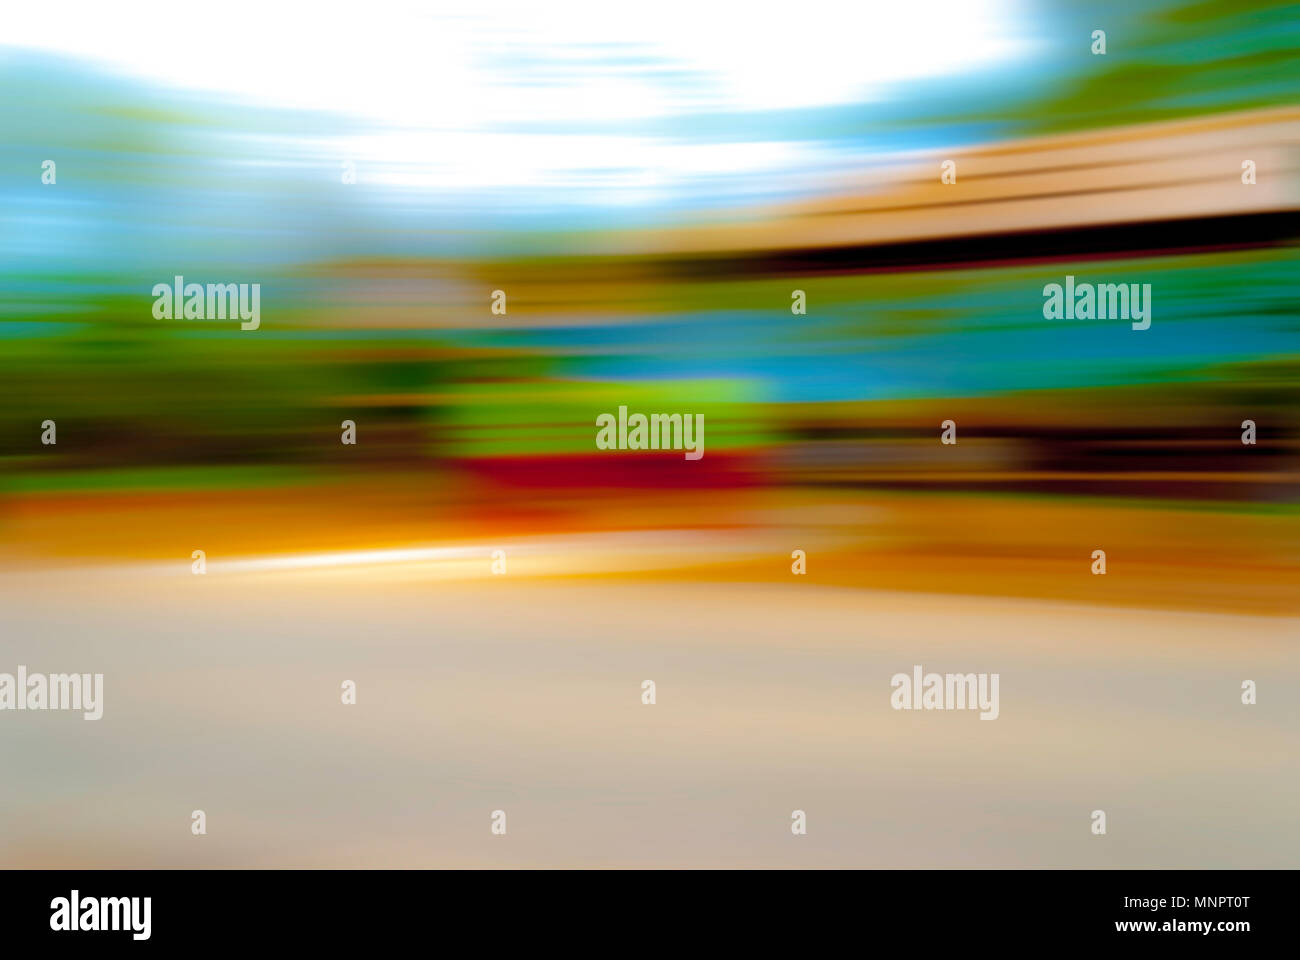 Abstract unrealistic colorful background, horizontal motion blur simulating speed. Copy space. Stock Photo